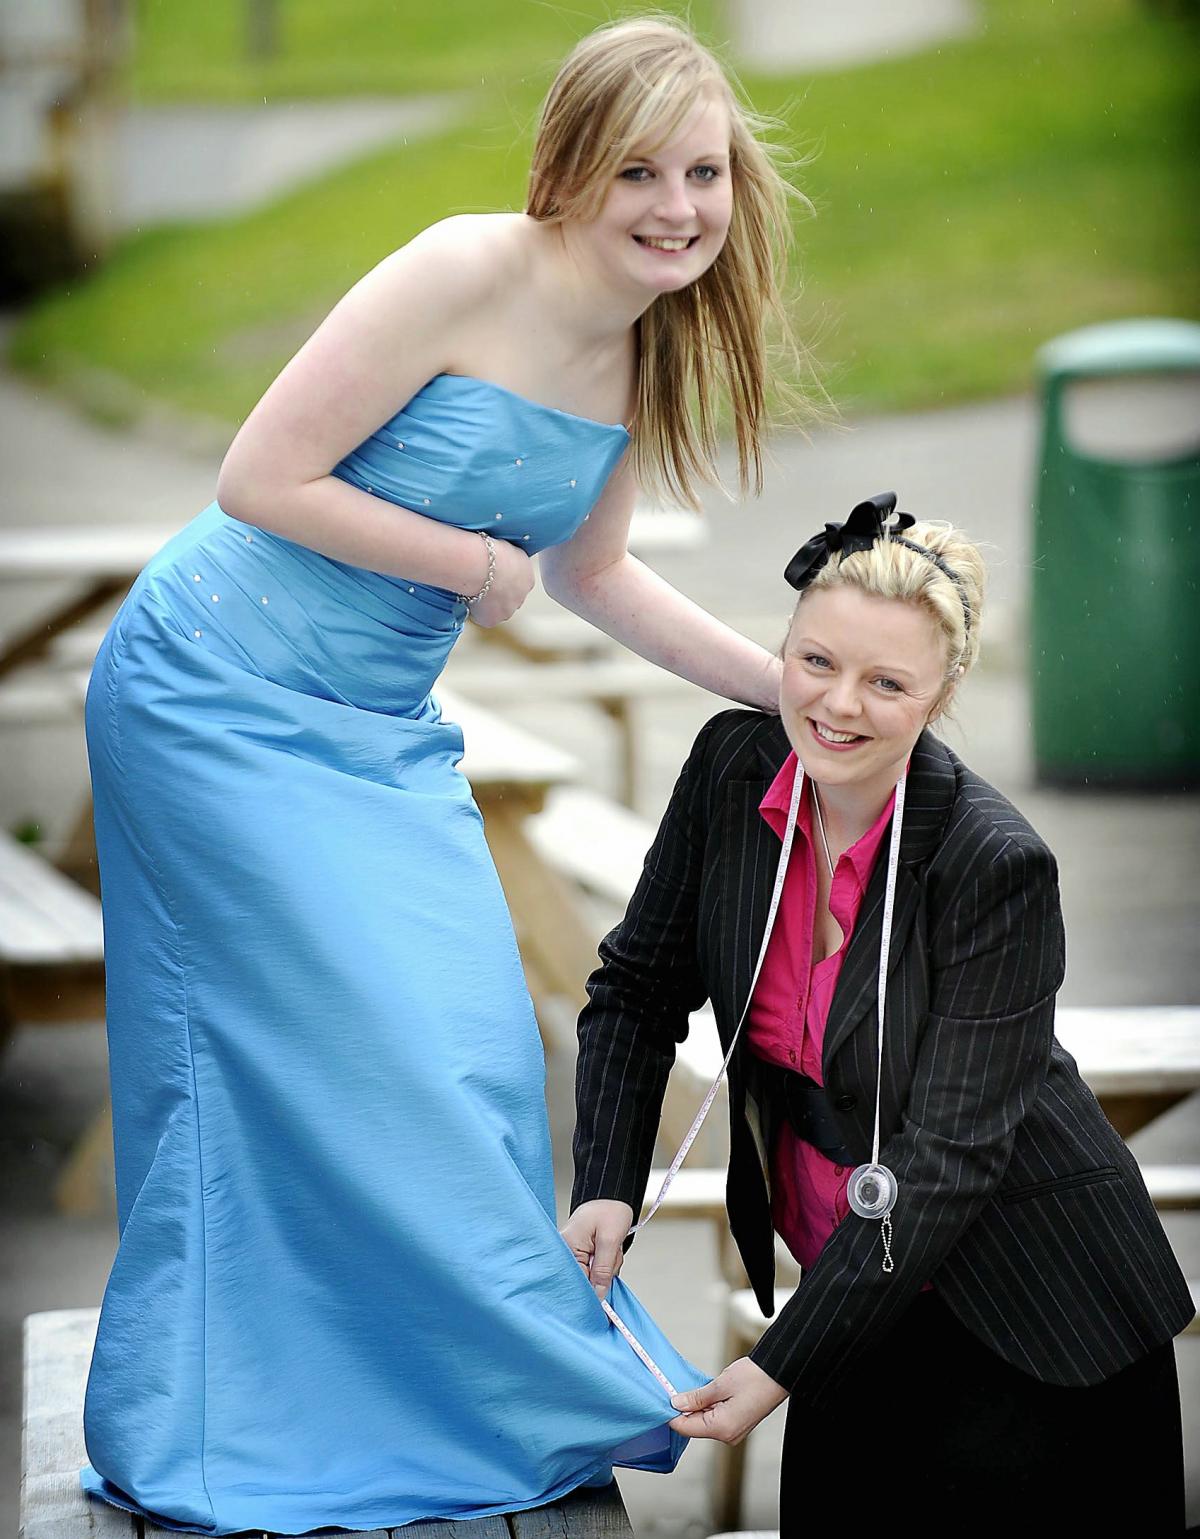 Lauren Adamson will go to the school prom – and in style after winning a fancy frock in a competition. 